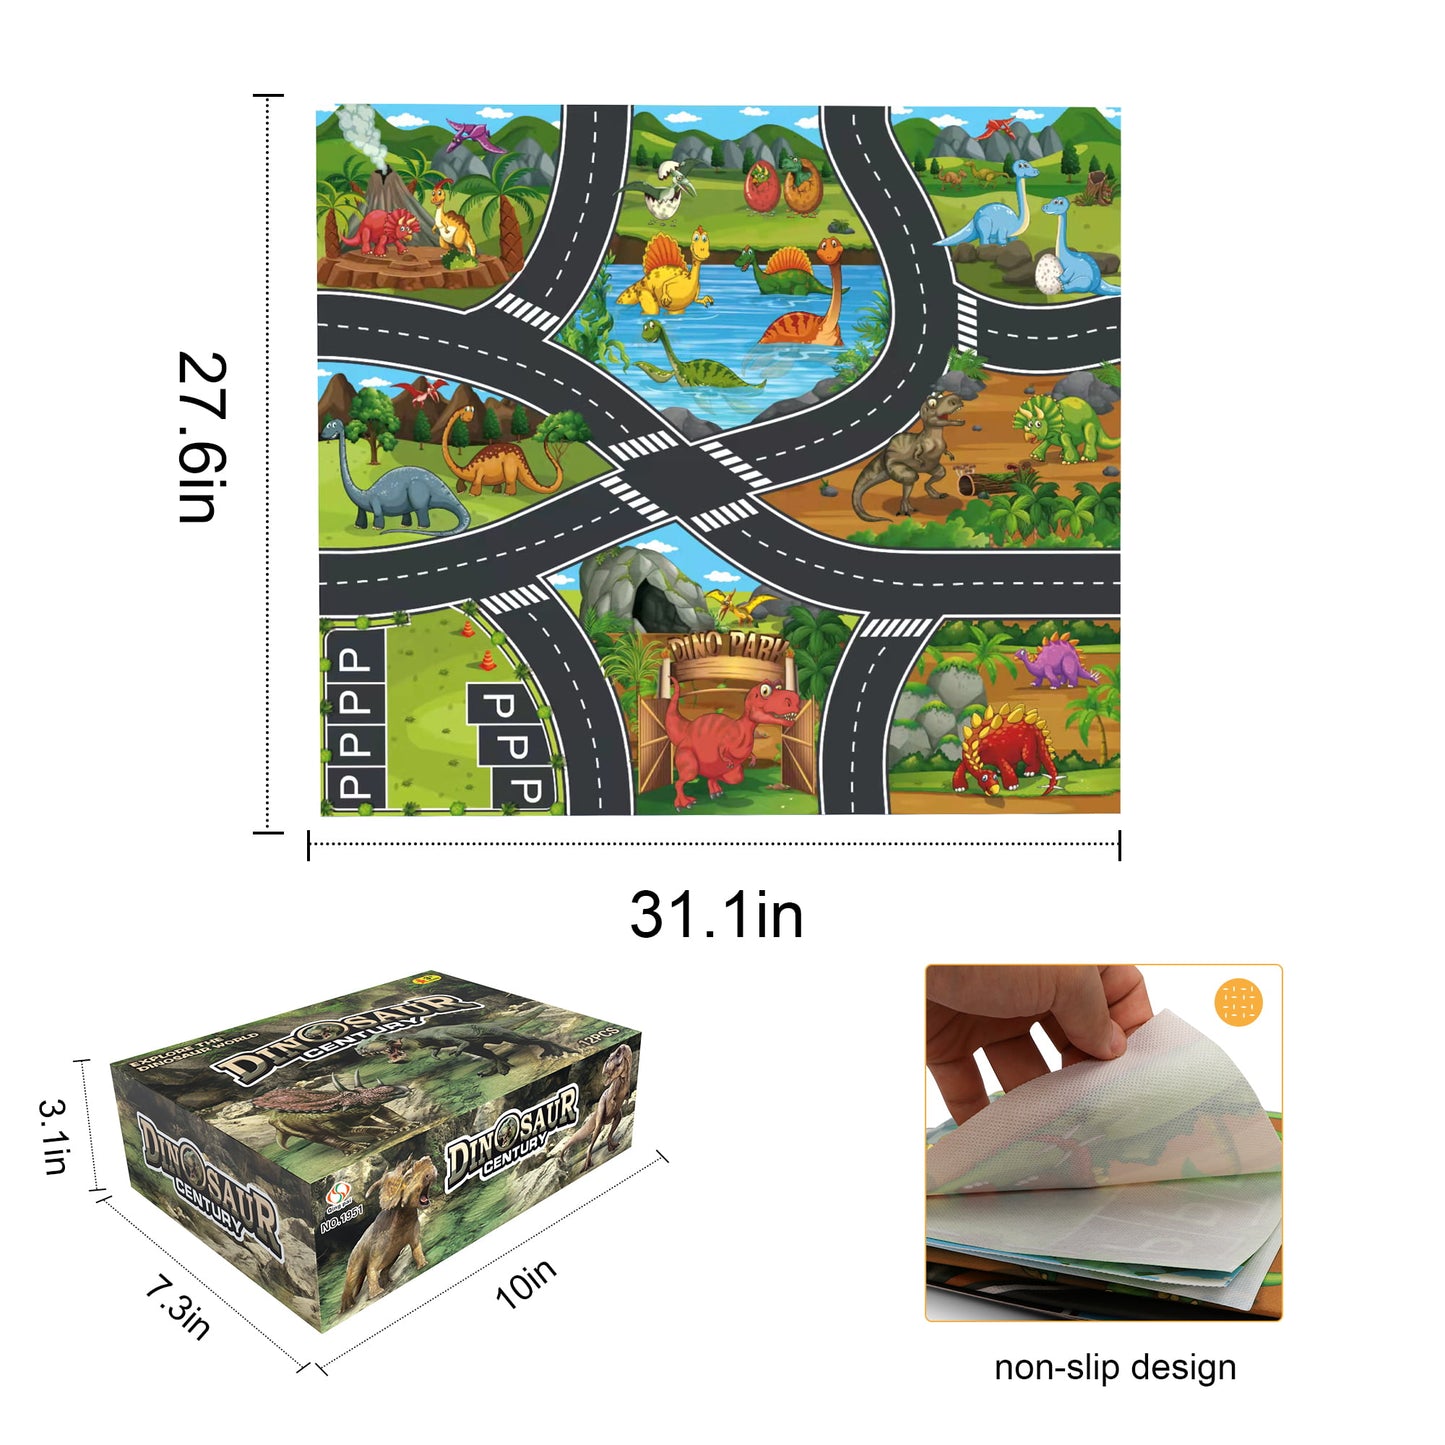 Jurassic Dinosaur Toys Set for Kids, 12 Dinosaur Figures with Play Mat, Realistic Dinosaurs Gift for Boys Girls Age 3 4 5 6+